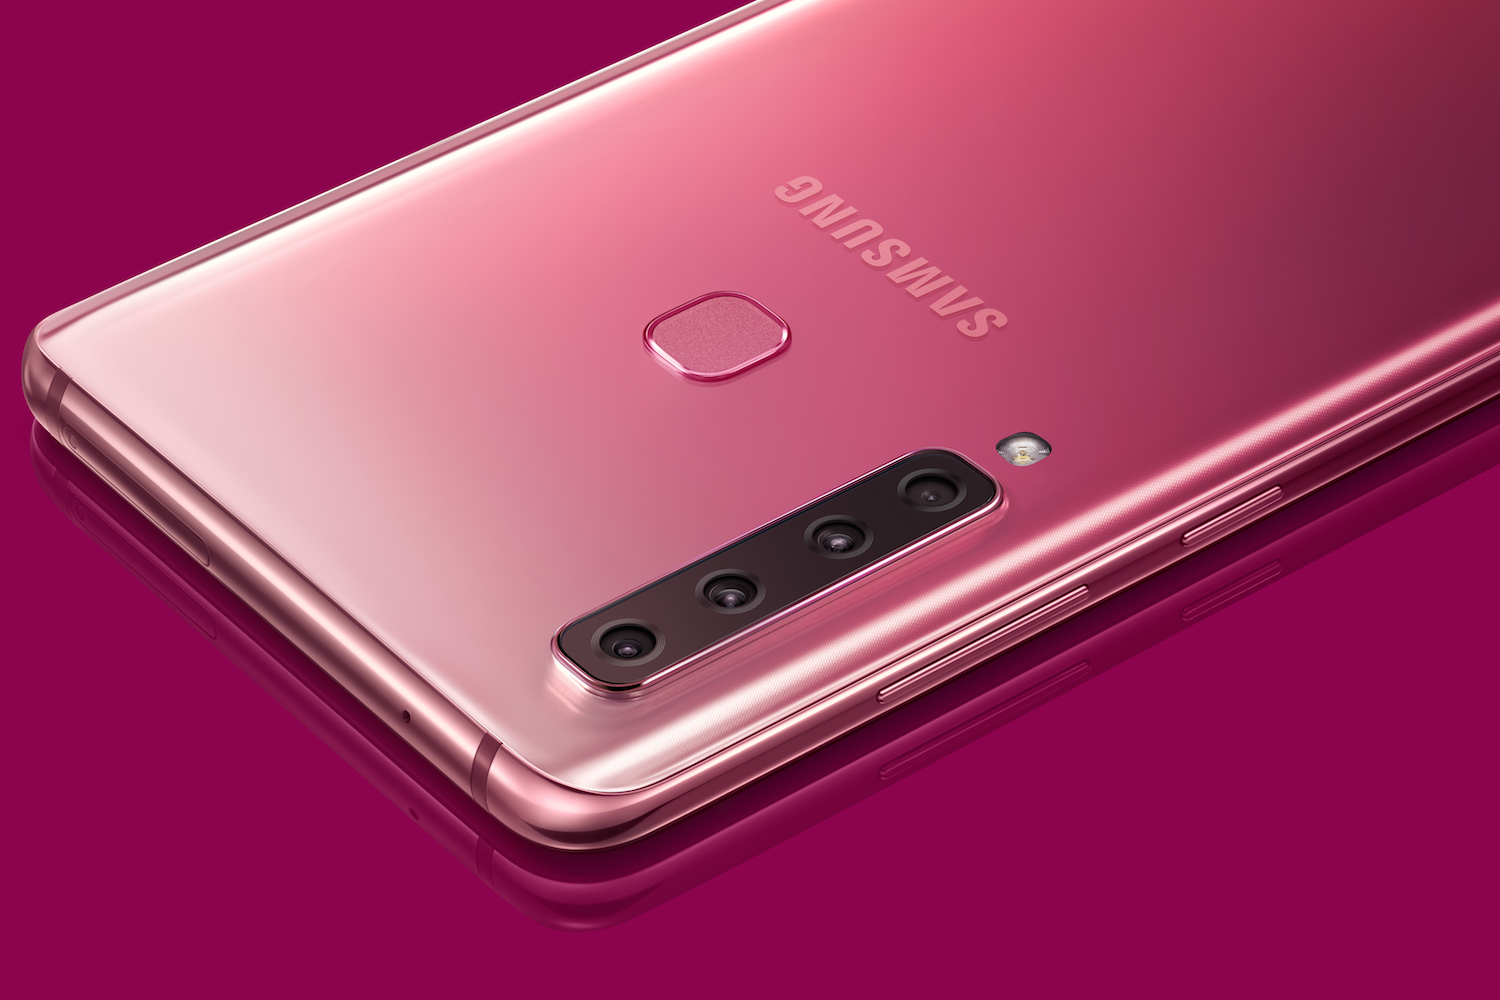 Samsung unveils Galaxy A9: World's first phone with four rear cameras